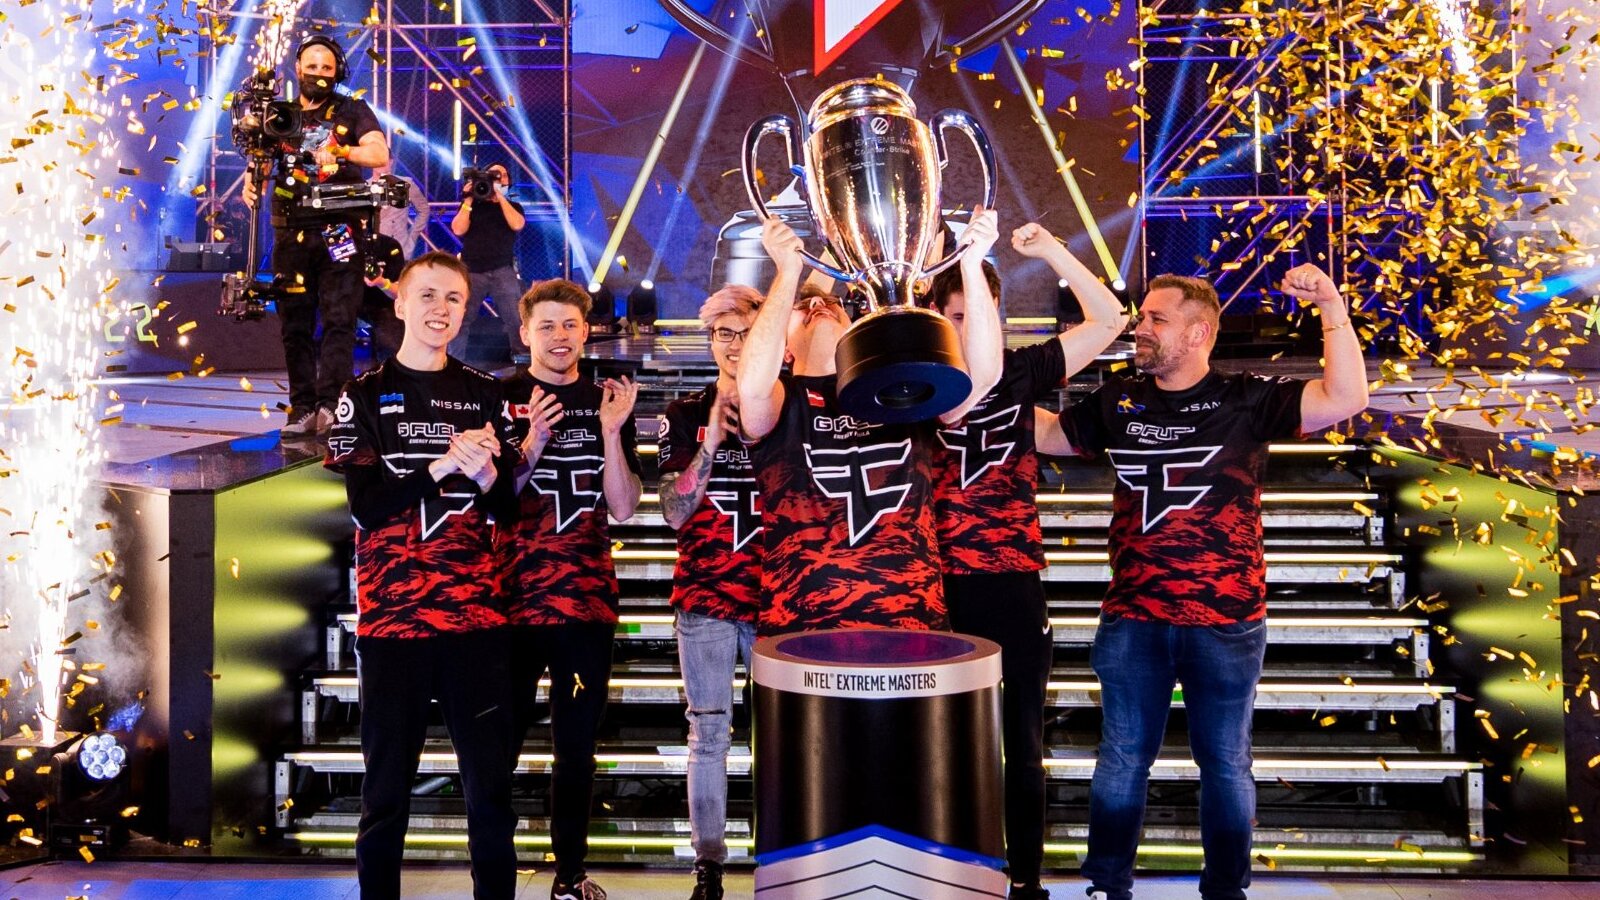 IEM Katowice 2022 is FaZe's first championship this year